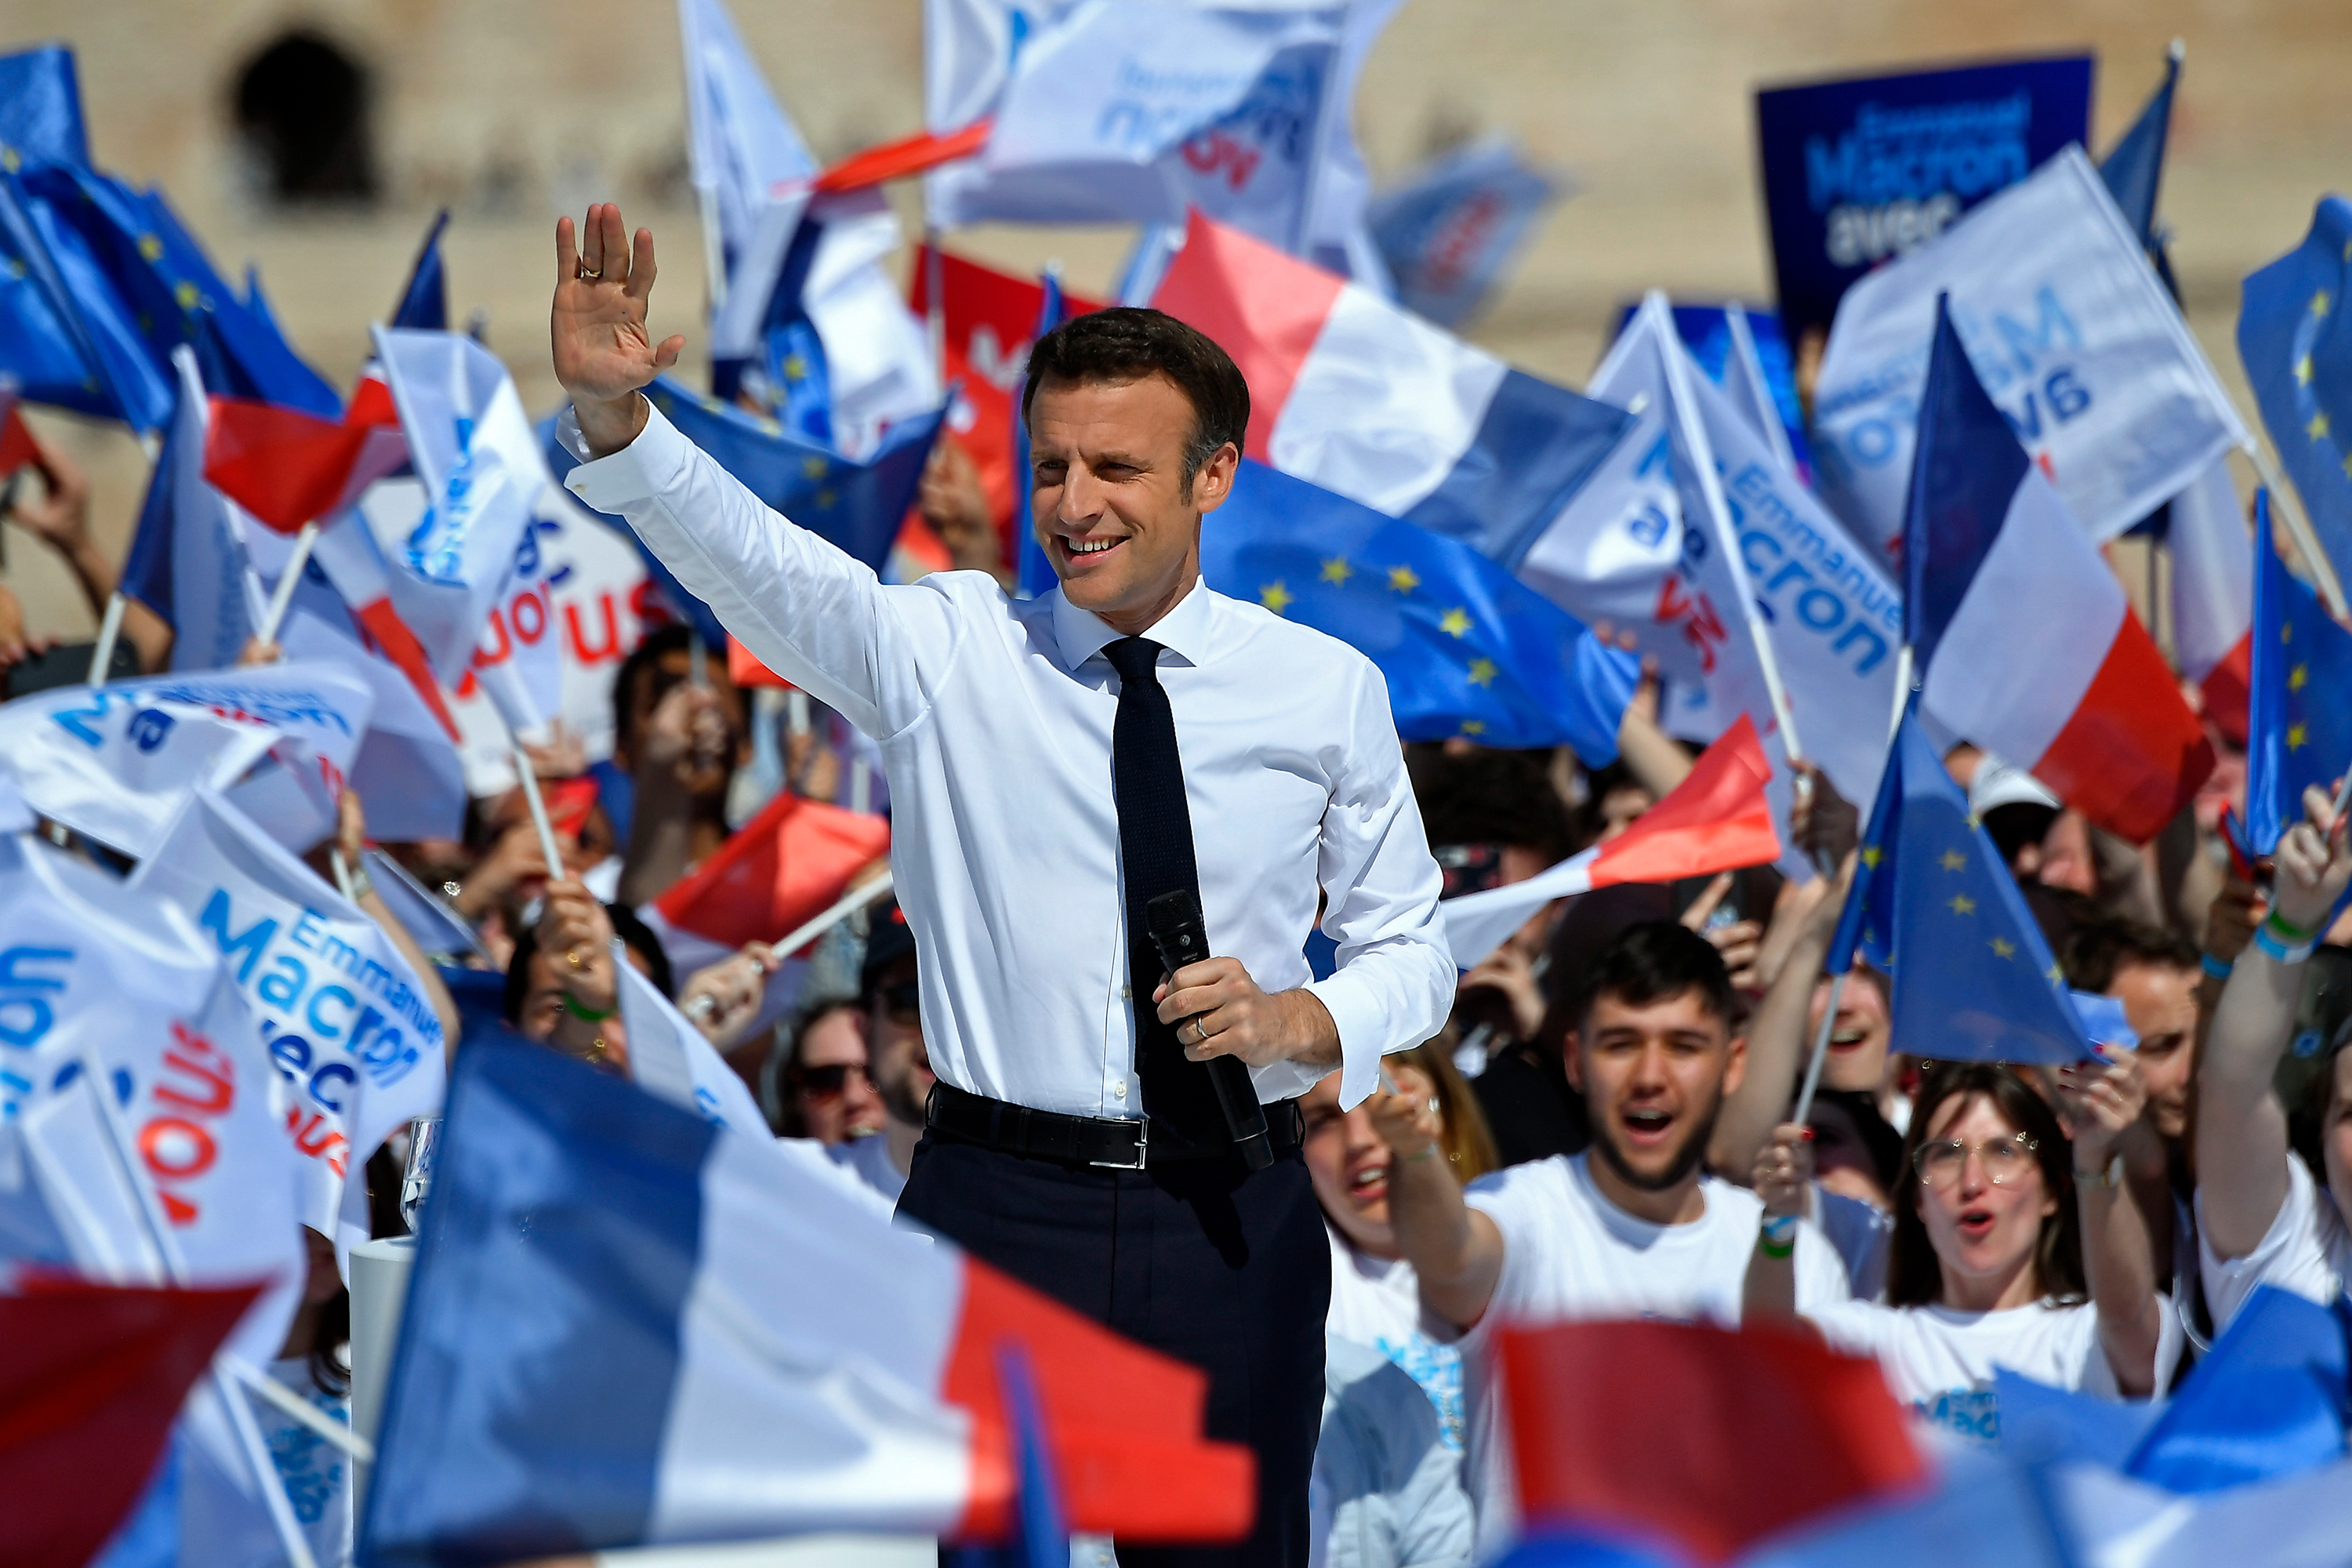 Emmanuel Macron addresses voters during a campaign event on April 16 in Marseille, France. 